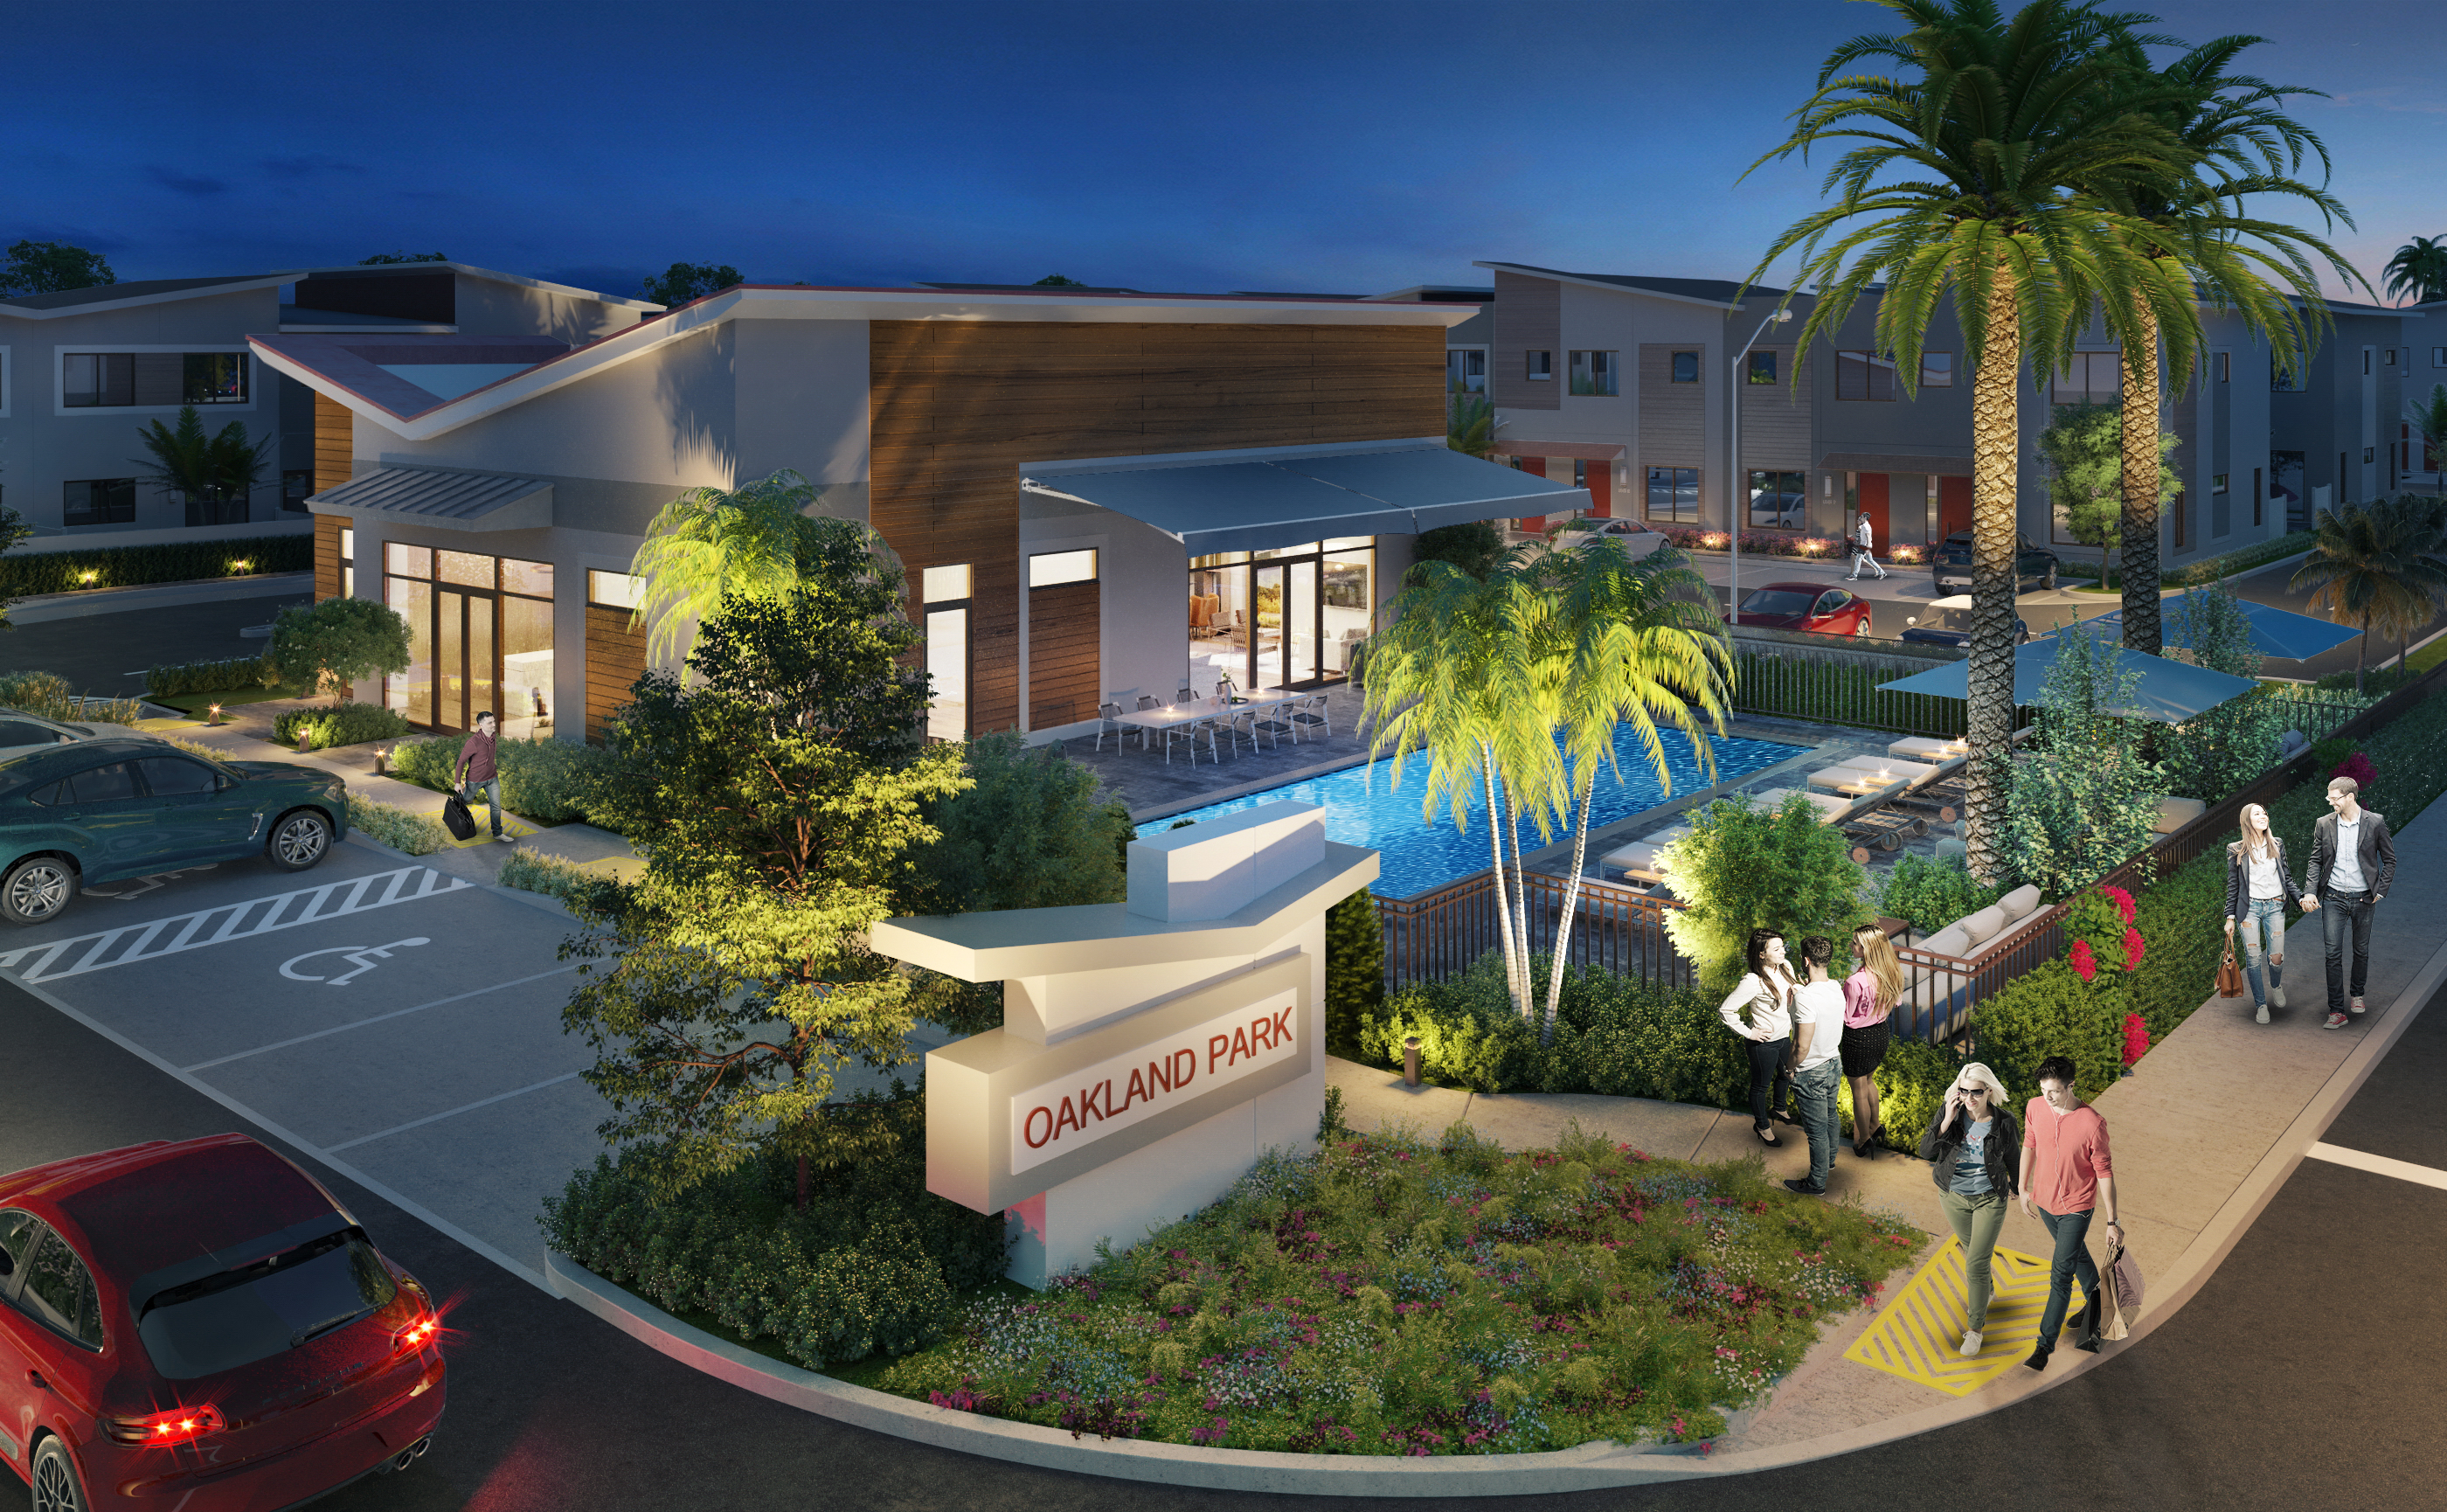 image1 Ceiba Groupe’s New Development, ID Oakland Park, a 106 Luxury Rental Townhome Community in Oakland Park, FL